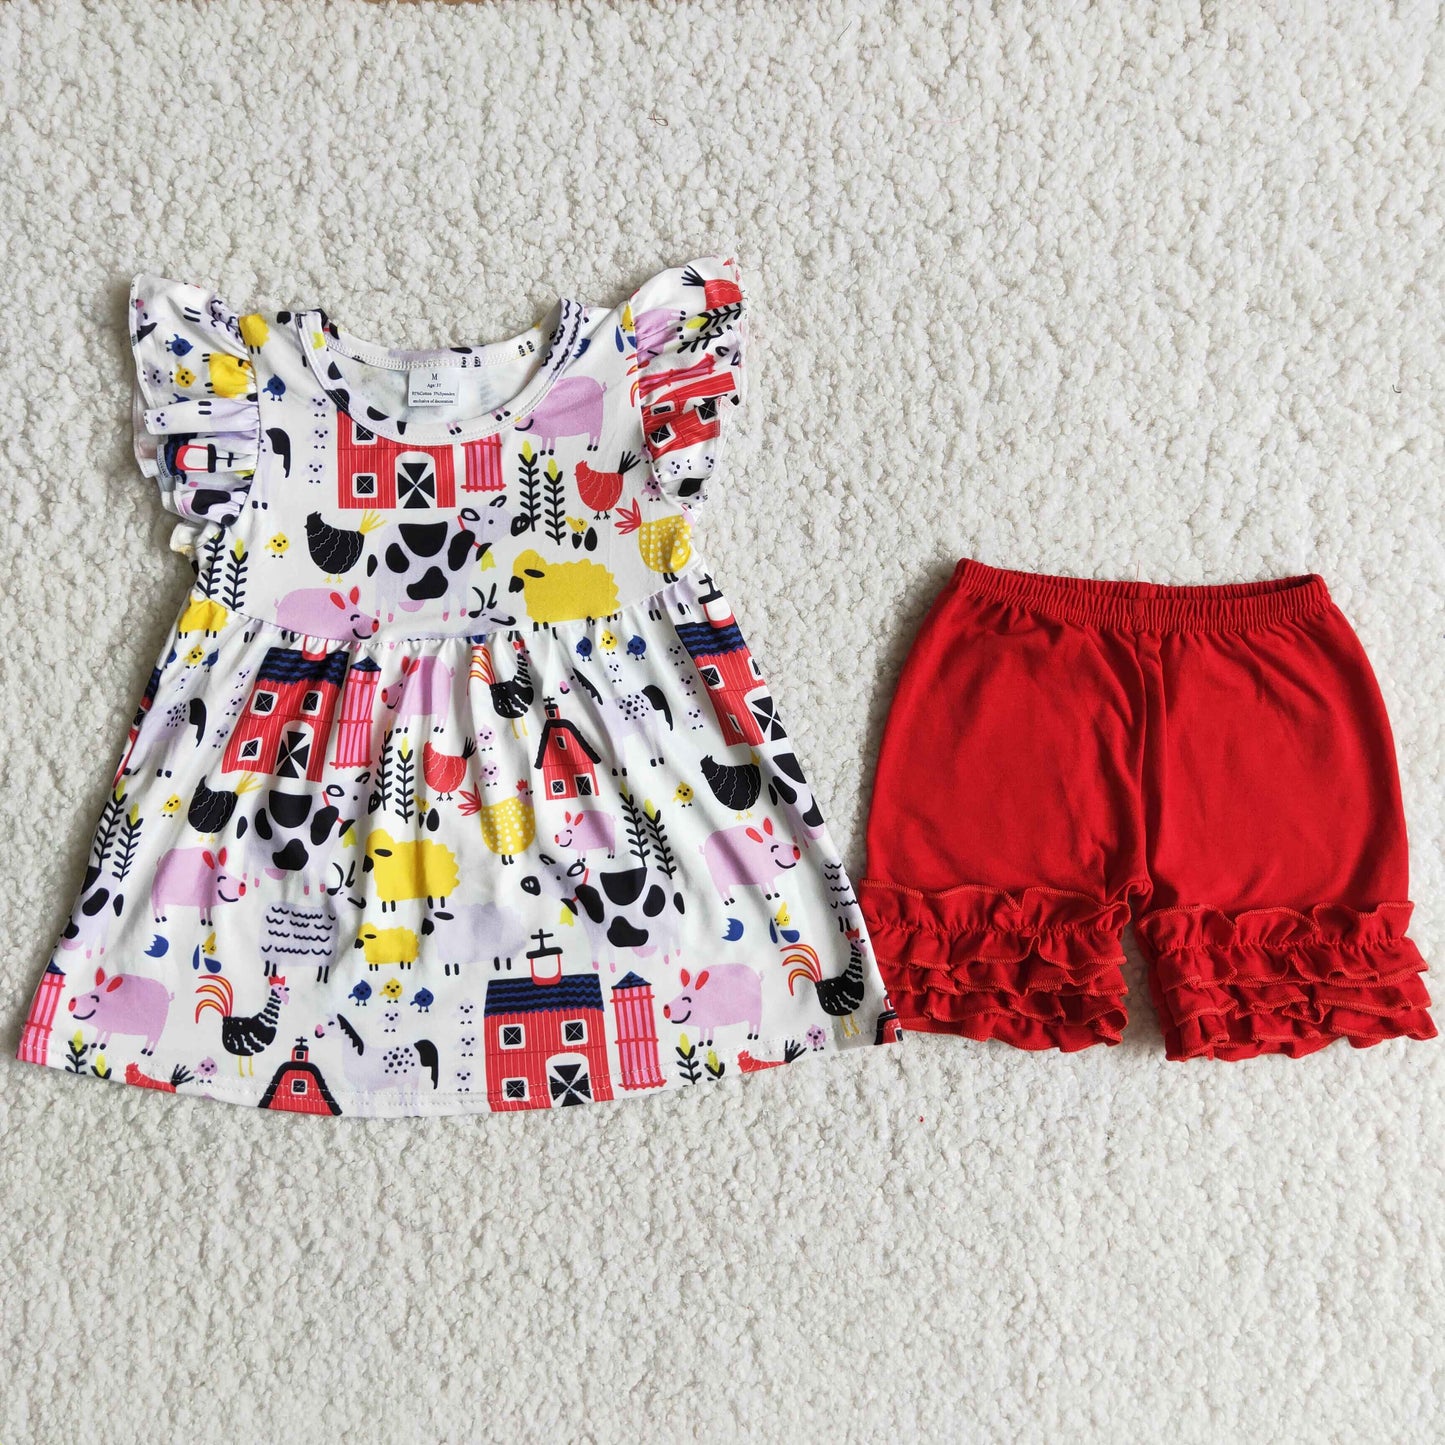 Farm print flutter sleeve red ruffle shorts girls outfits